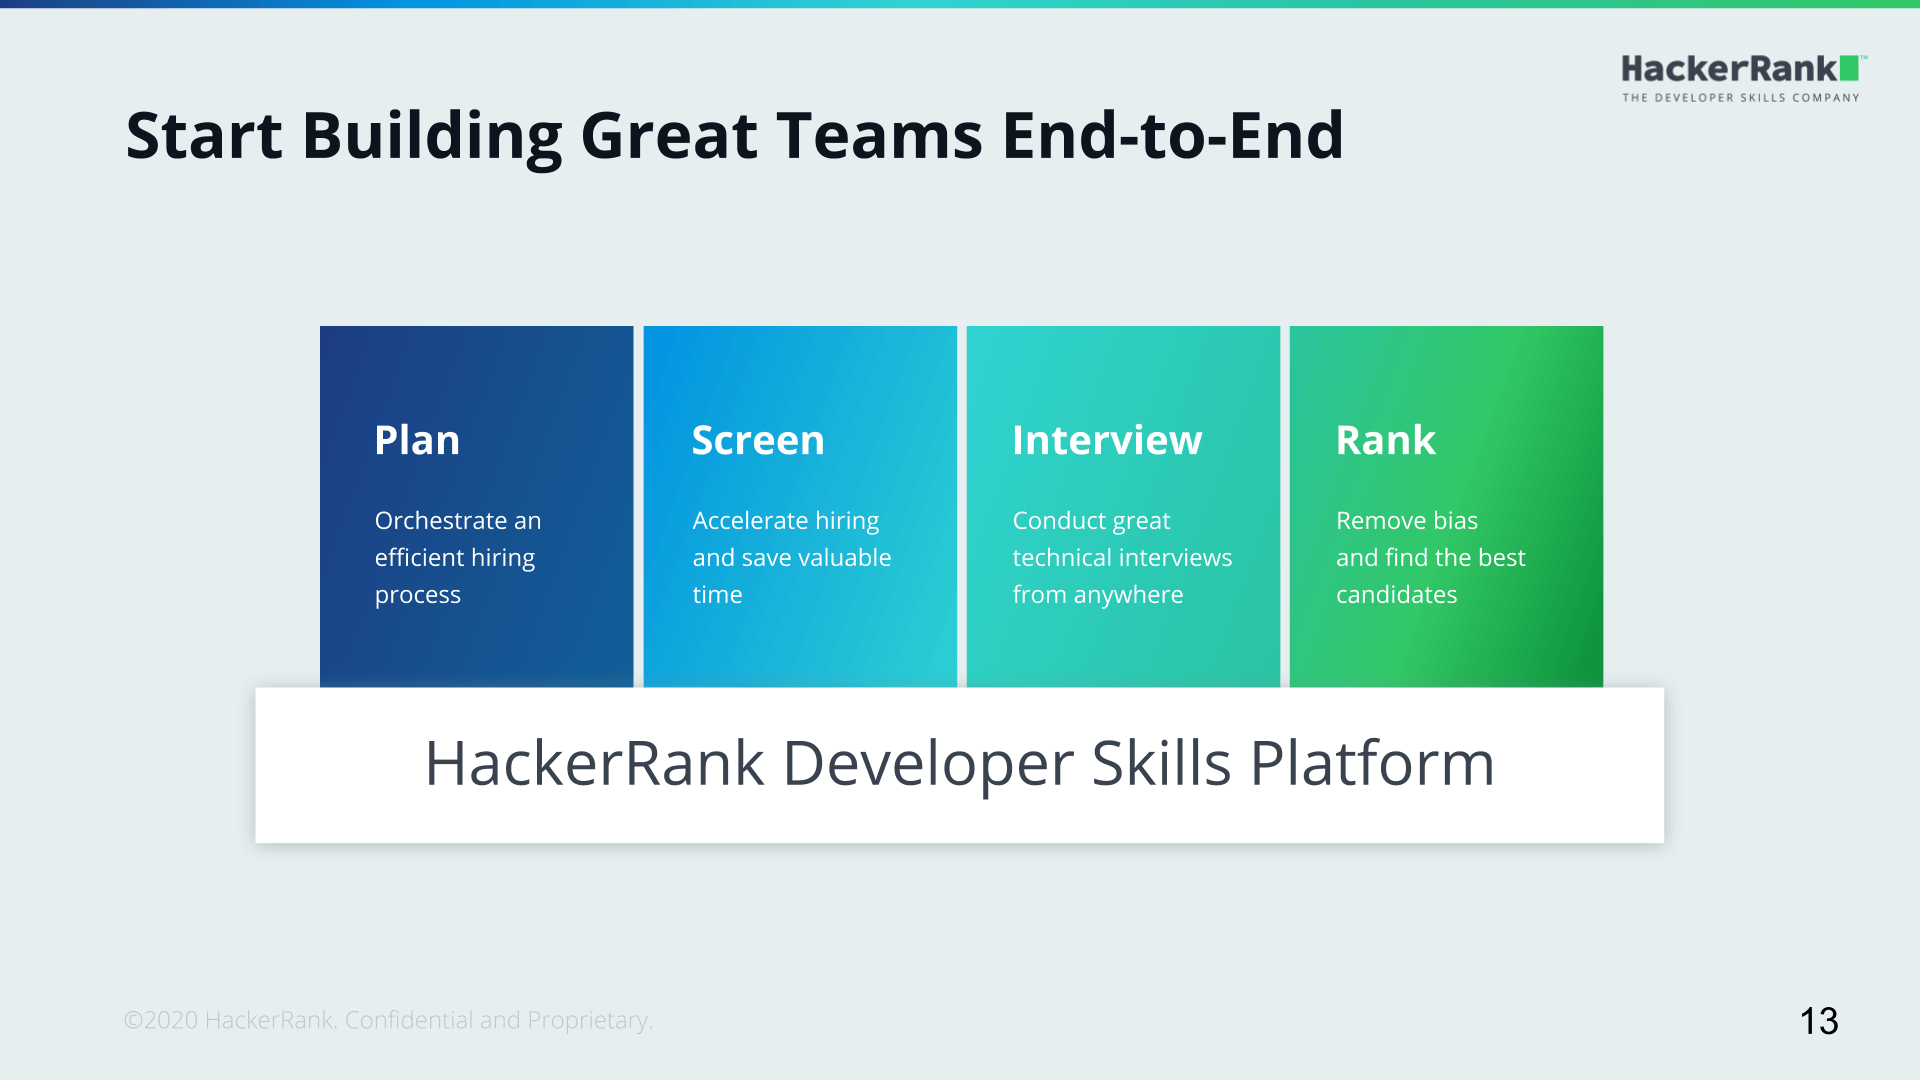 Start Building Great Teams End-to-End